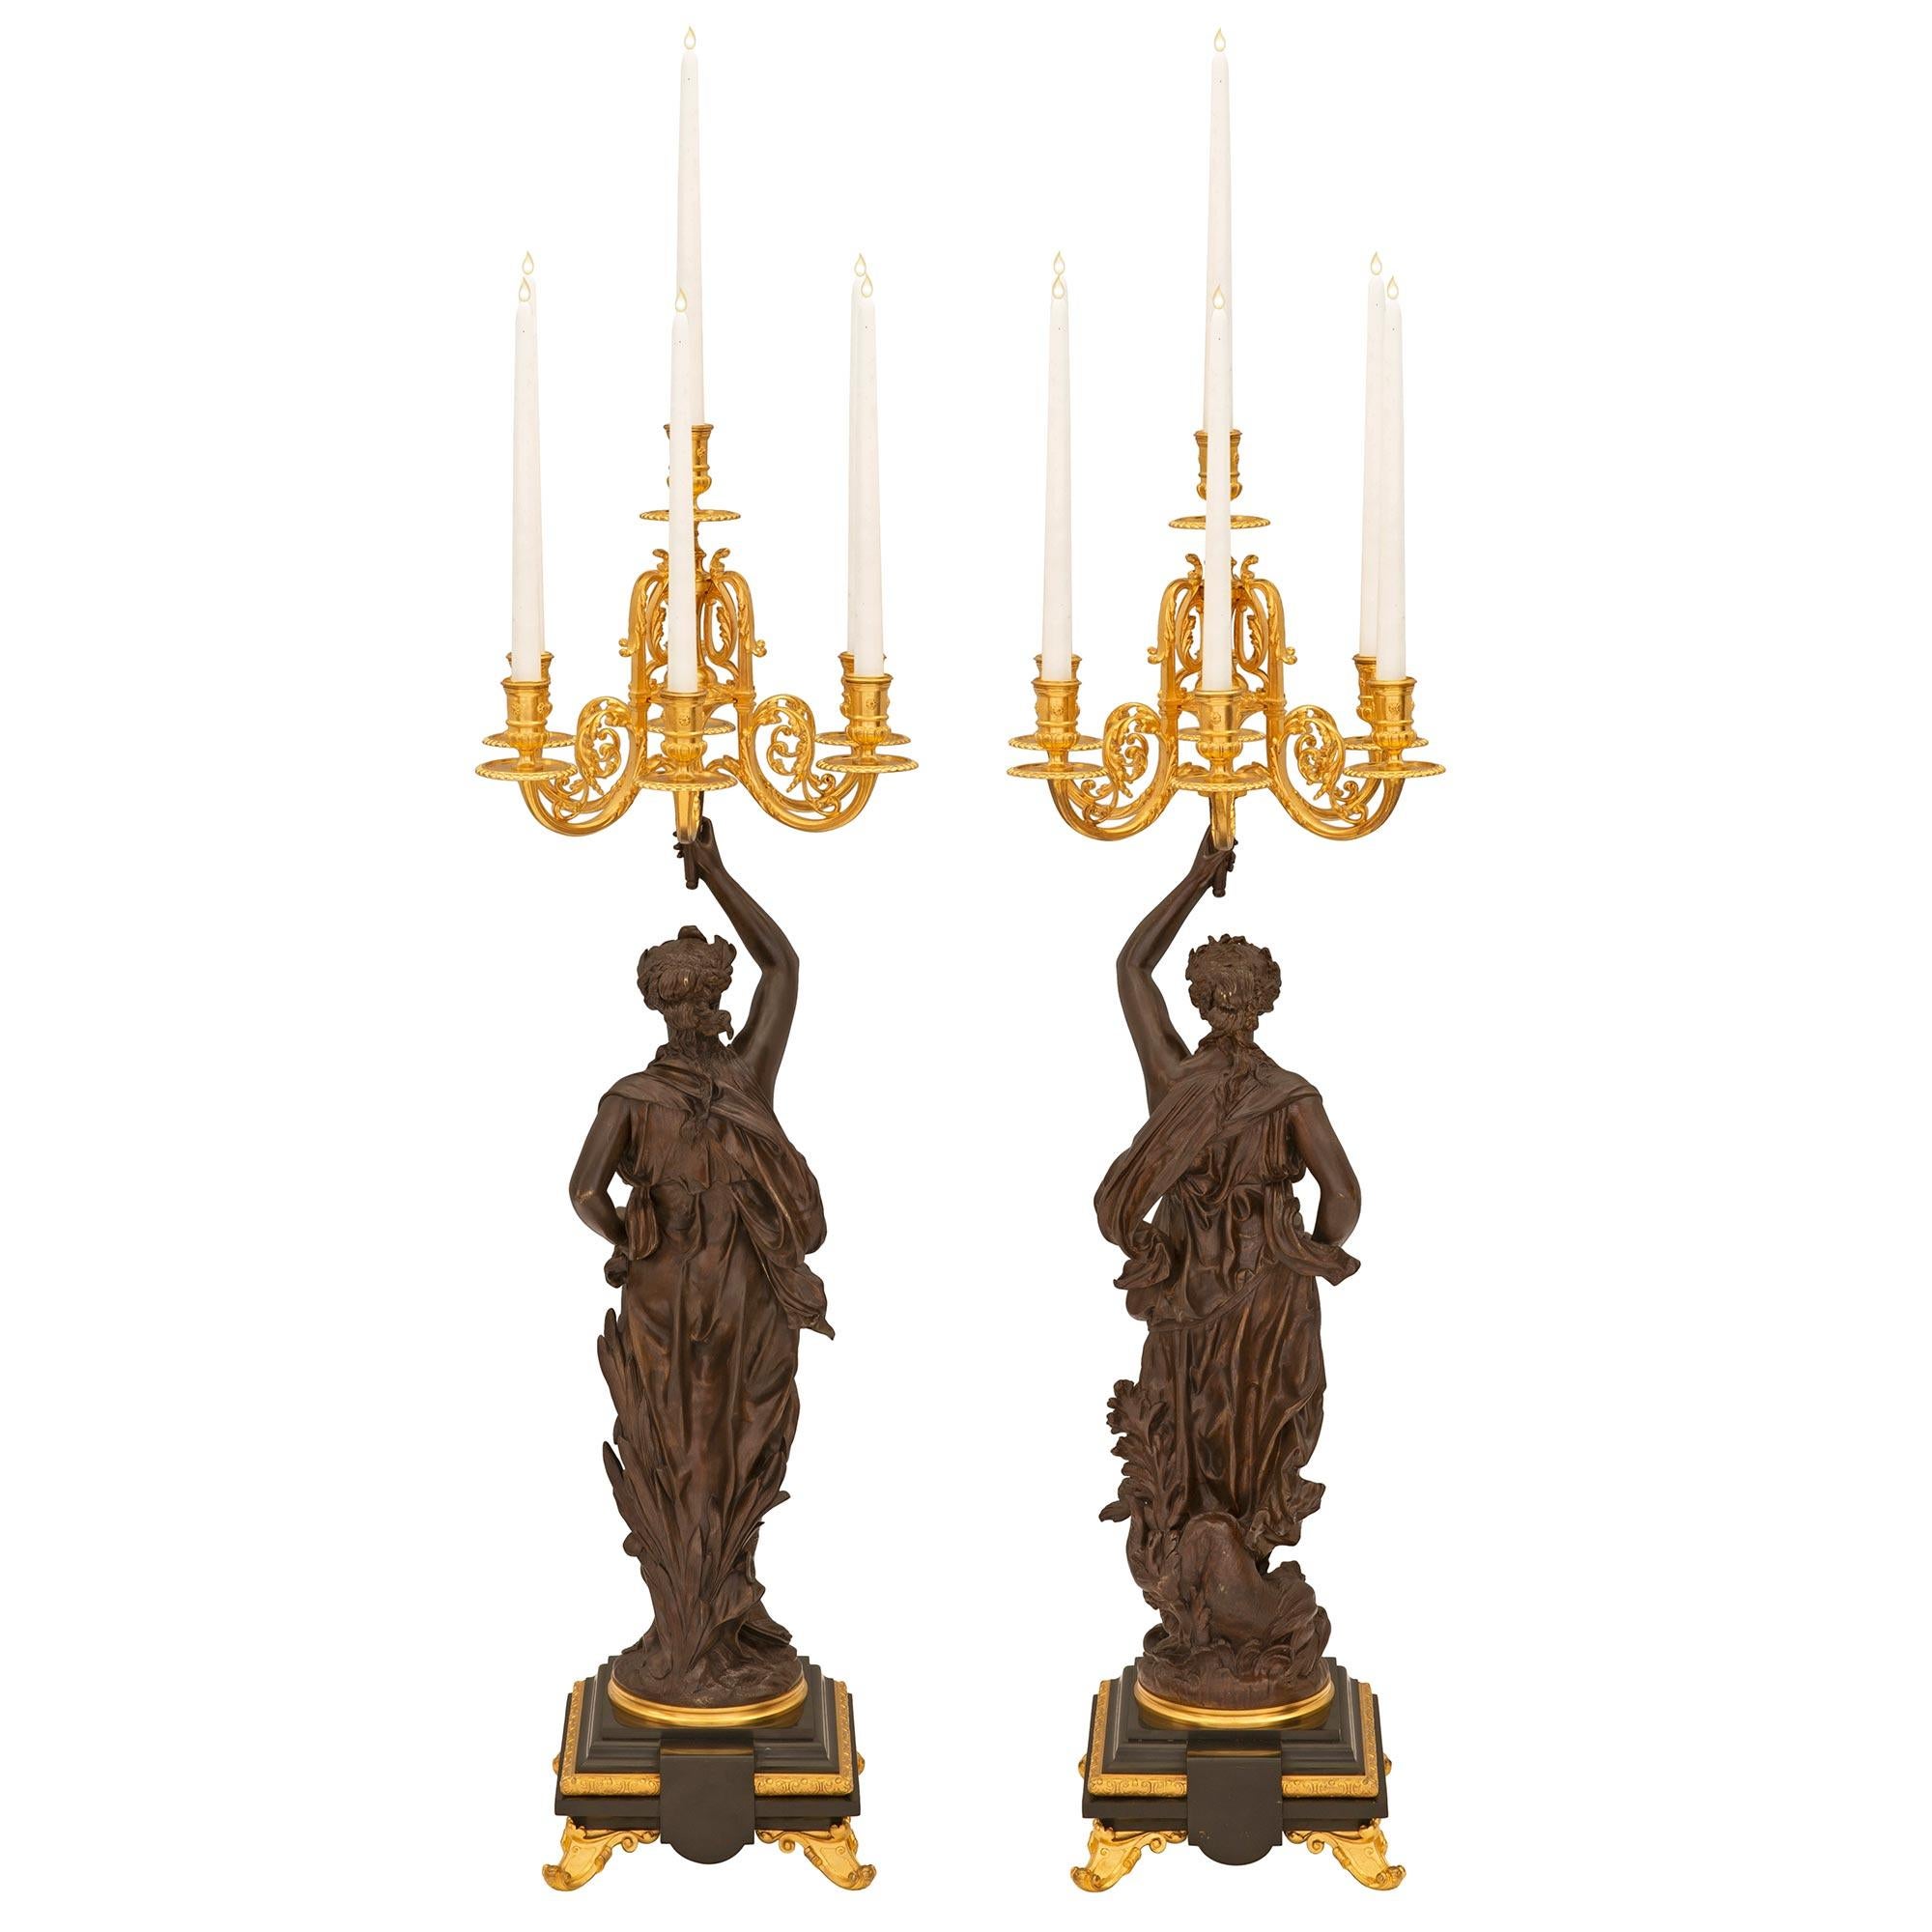 Pair of French 19th Century Renaissance St. Bronze, Ormolu, & Marble Candelbras In Good Condition For Sale In West Palm Beach, FL